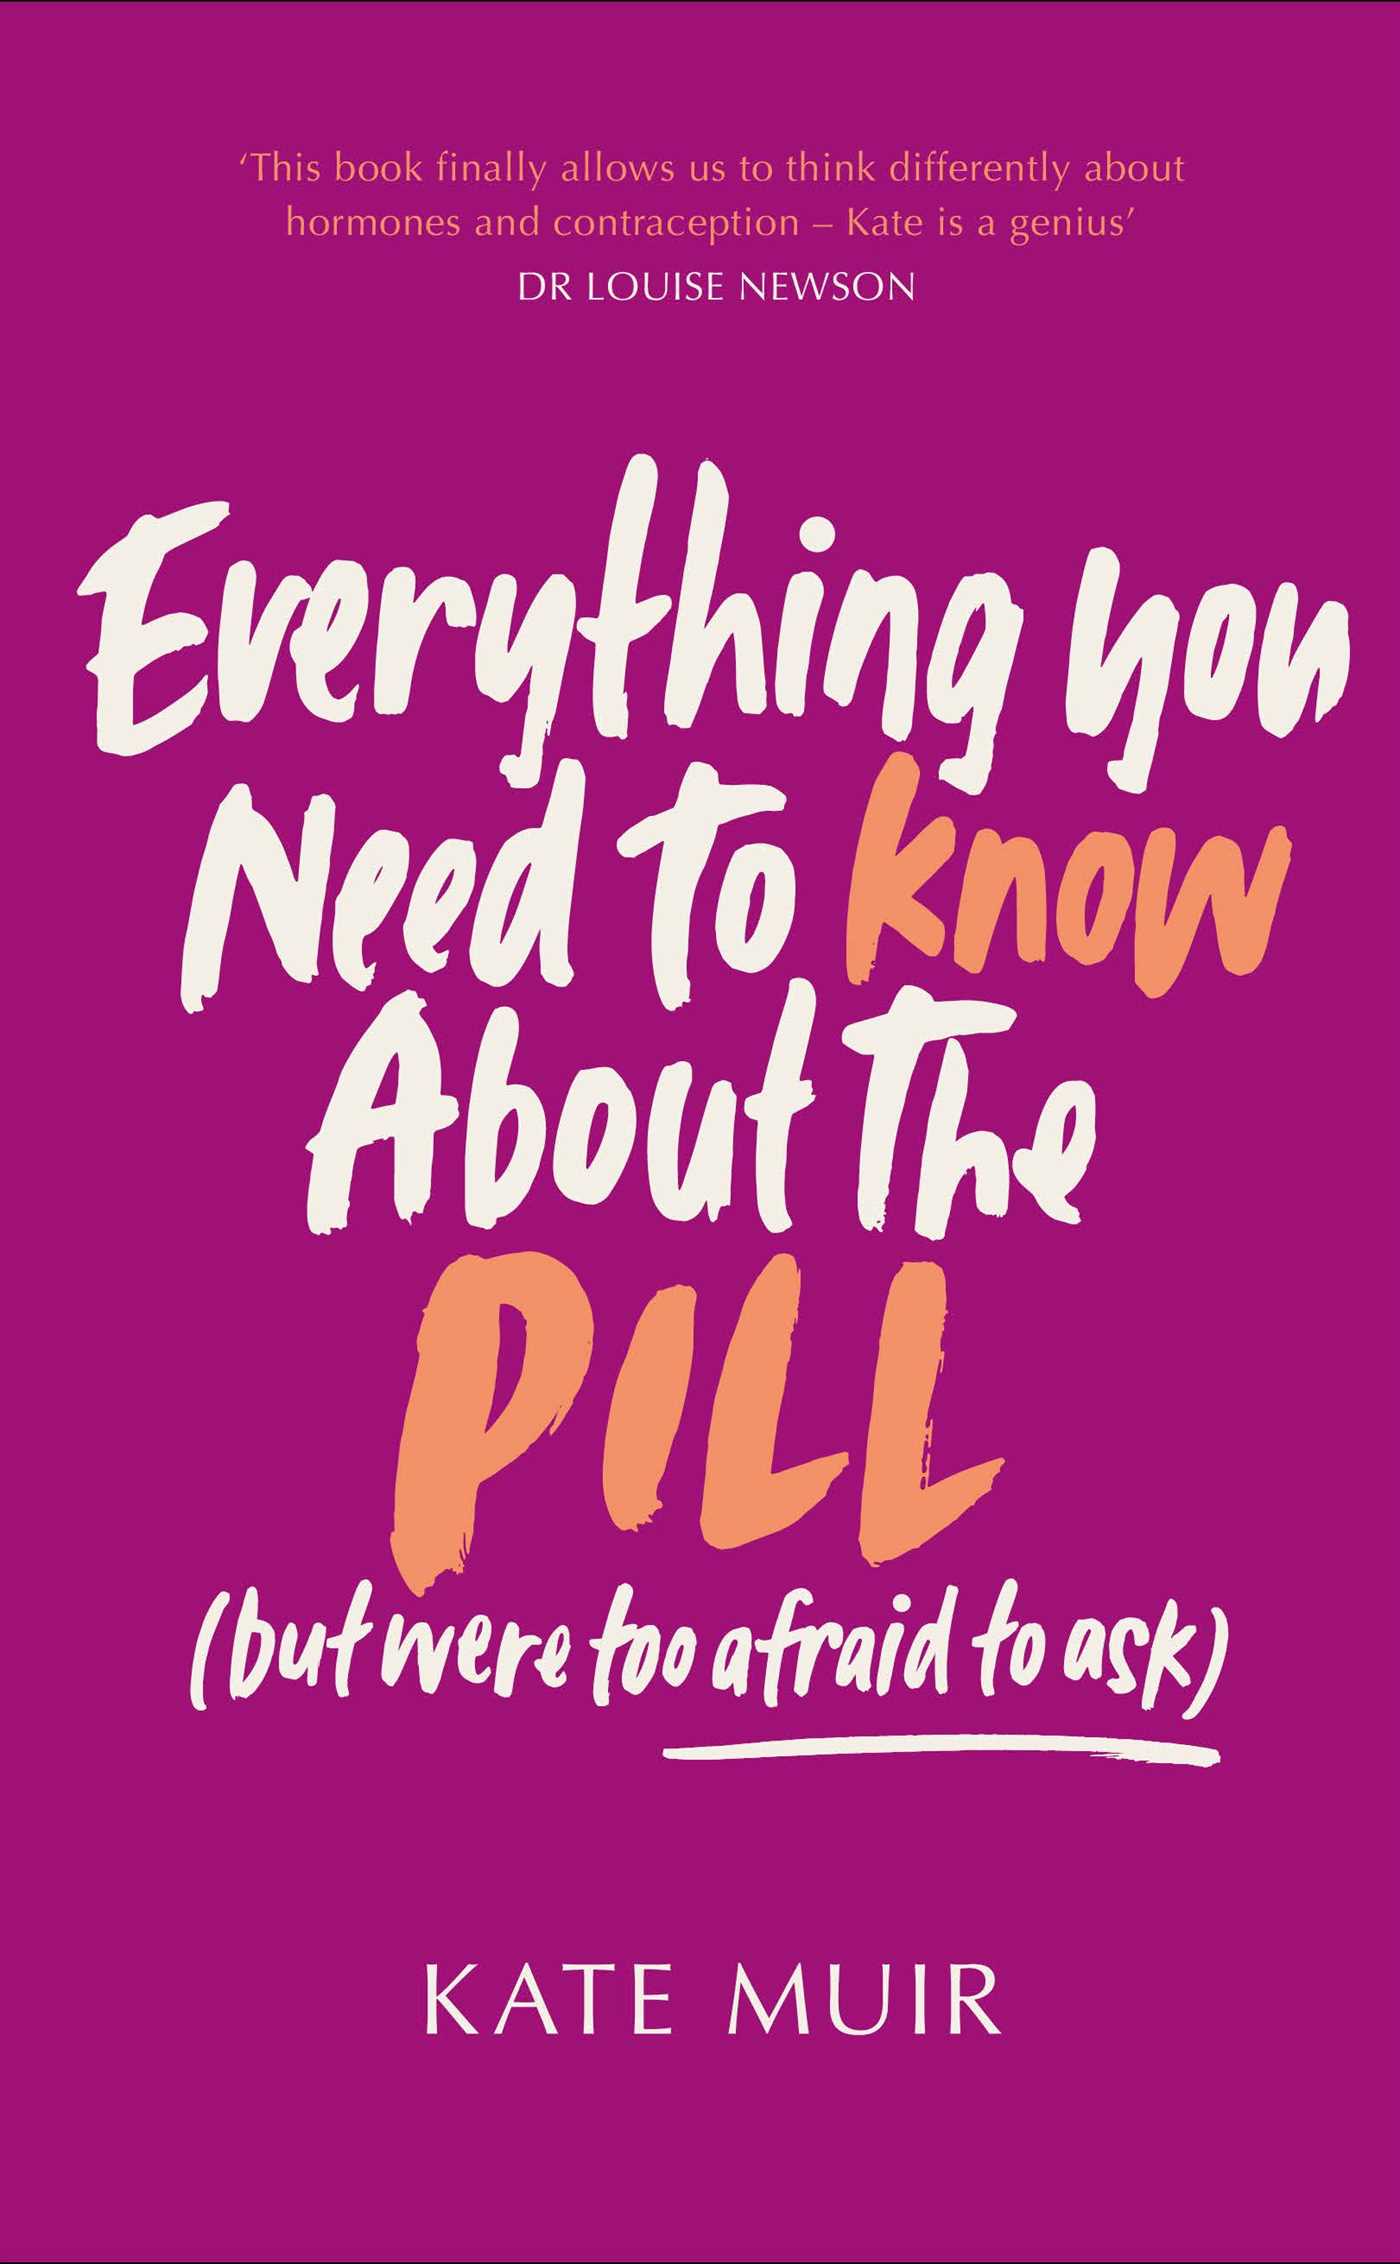 Everything you need to know about the Pill (but were afraid to ask) | Kate Muir | Charlie Byrne's